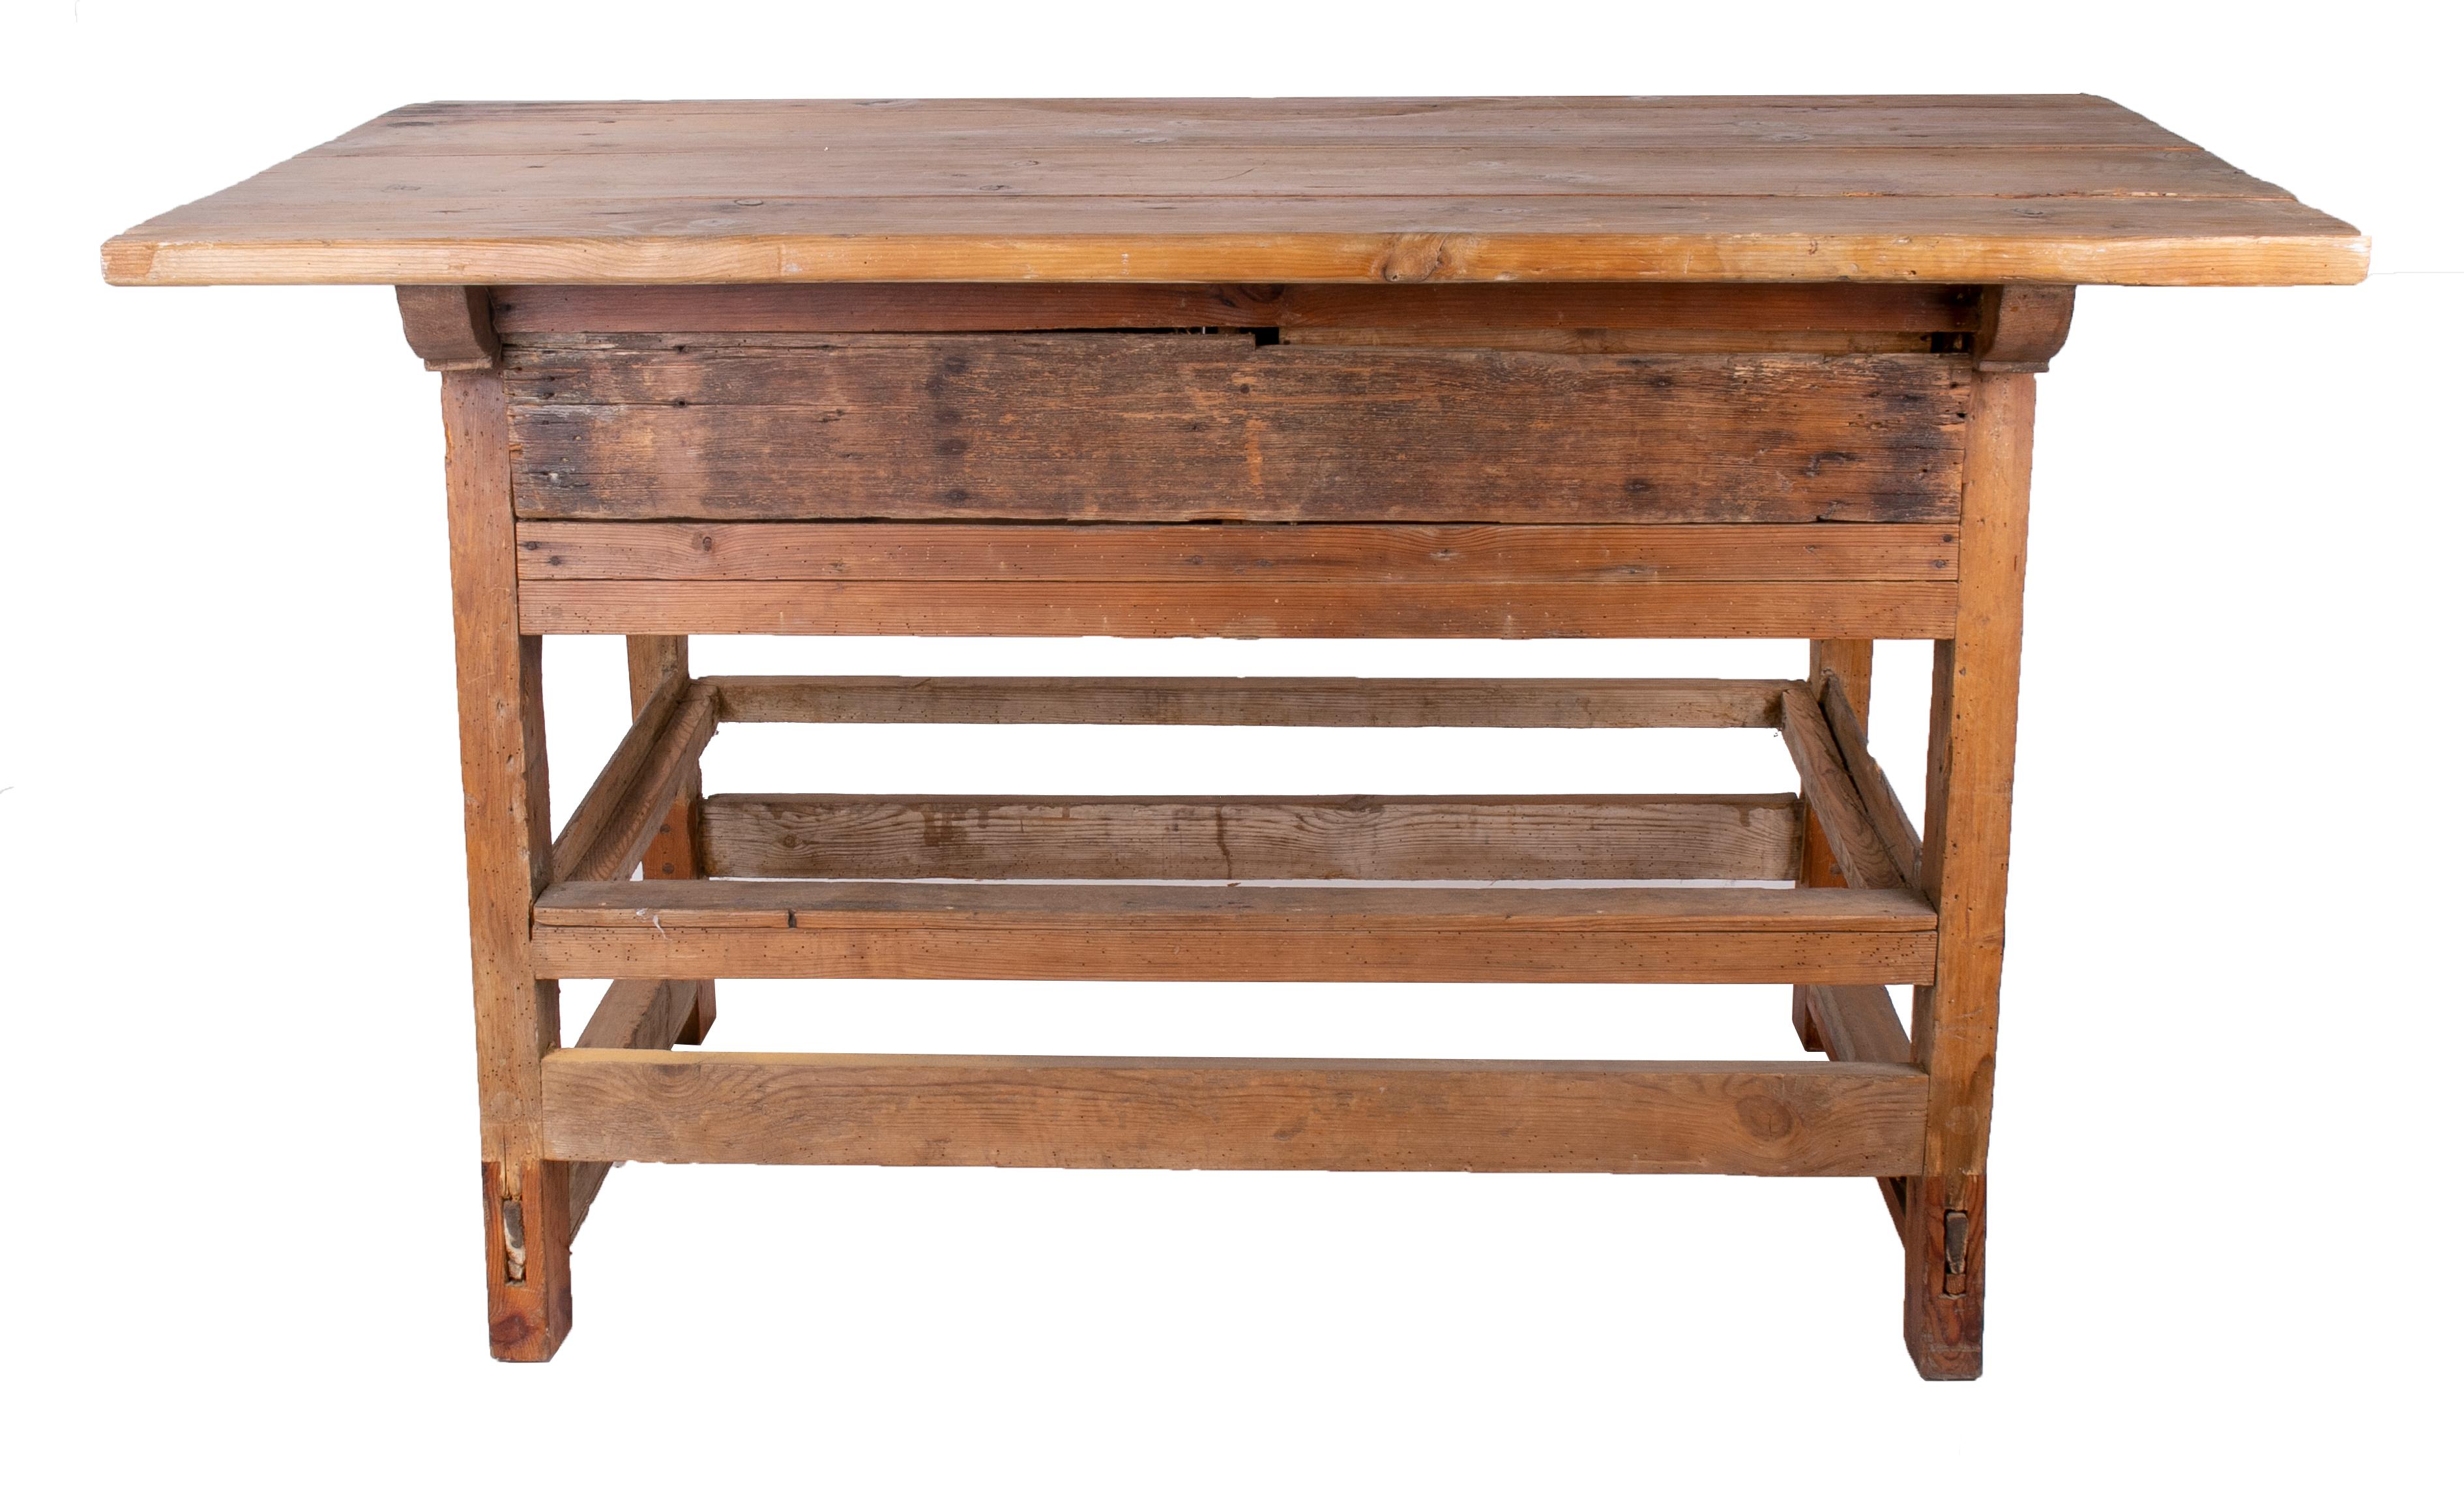 19th Century Spanish Two-Drawer Rustic Table with Iron Handles For Sale 3